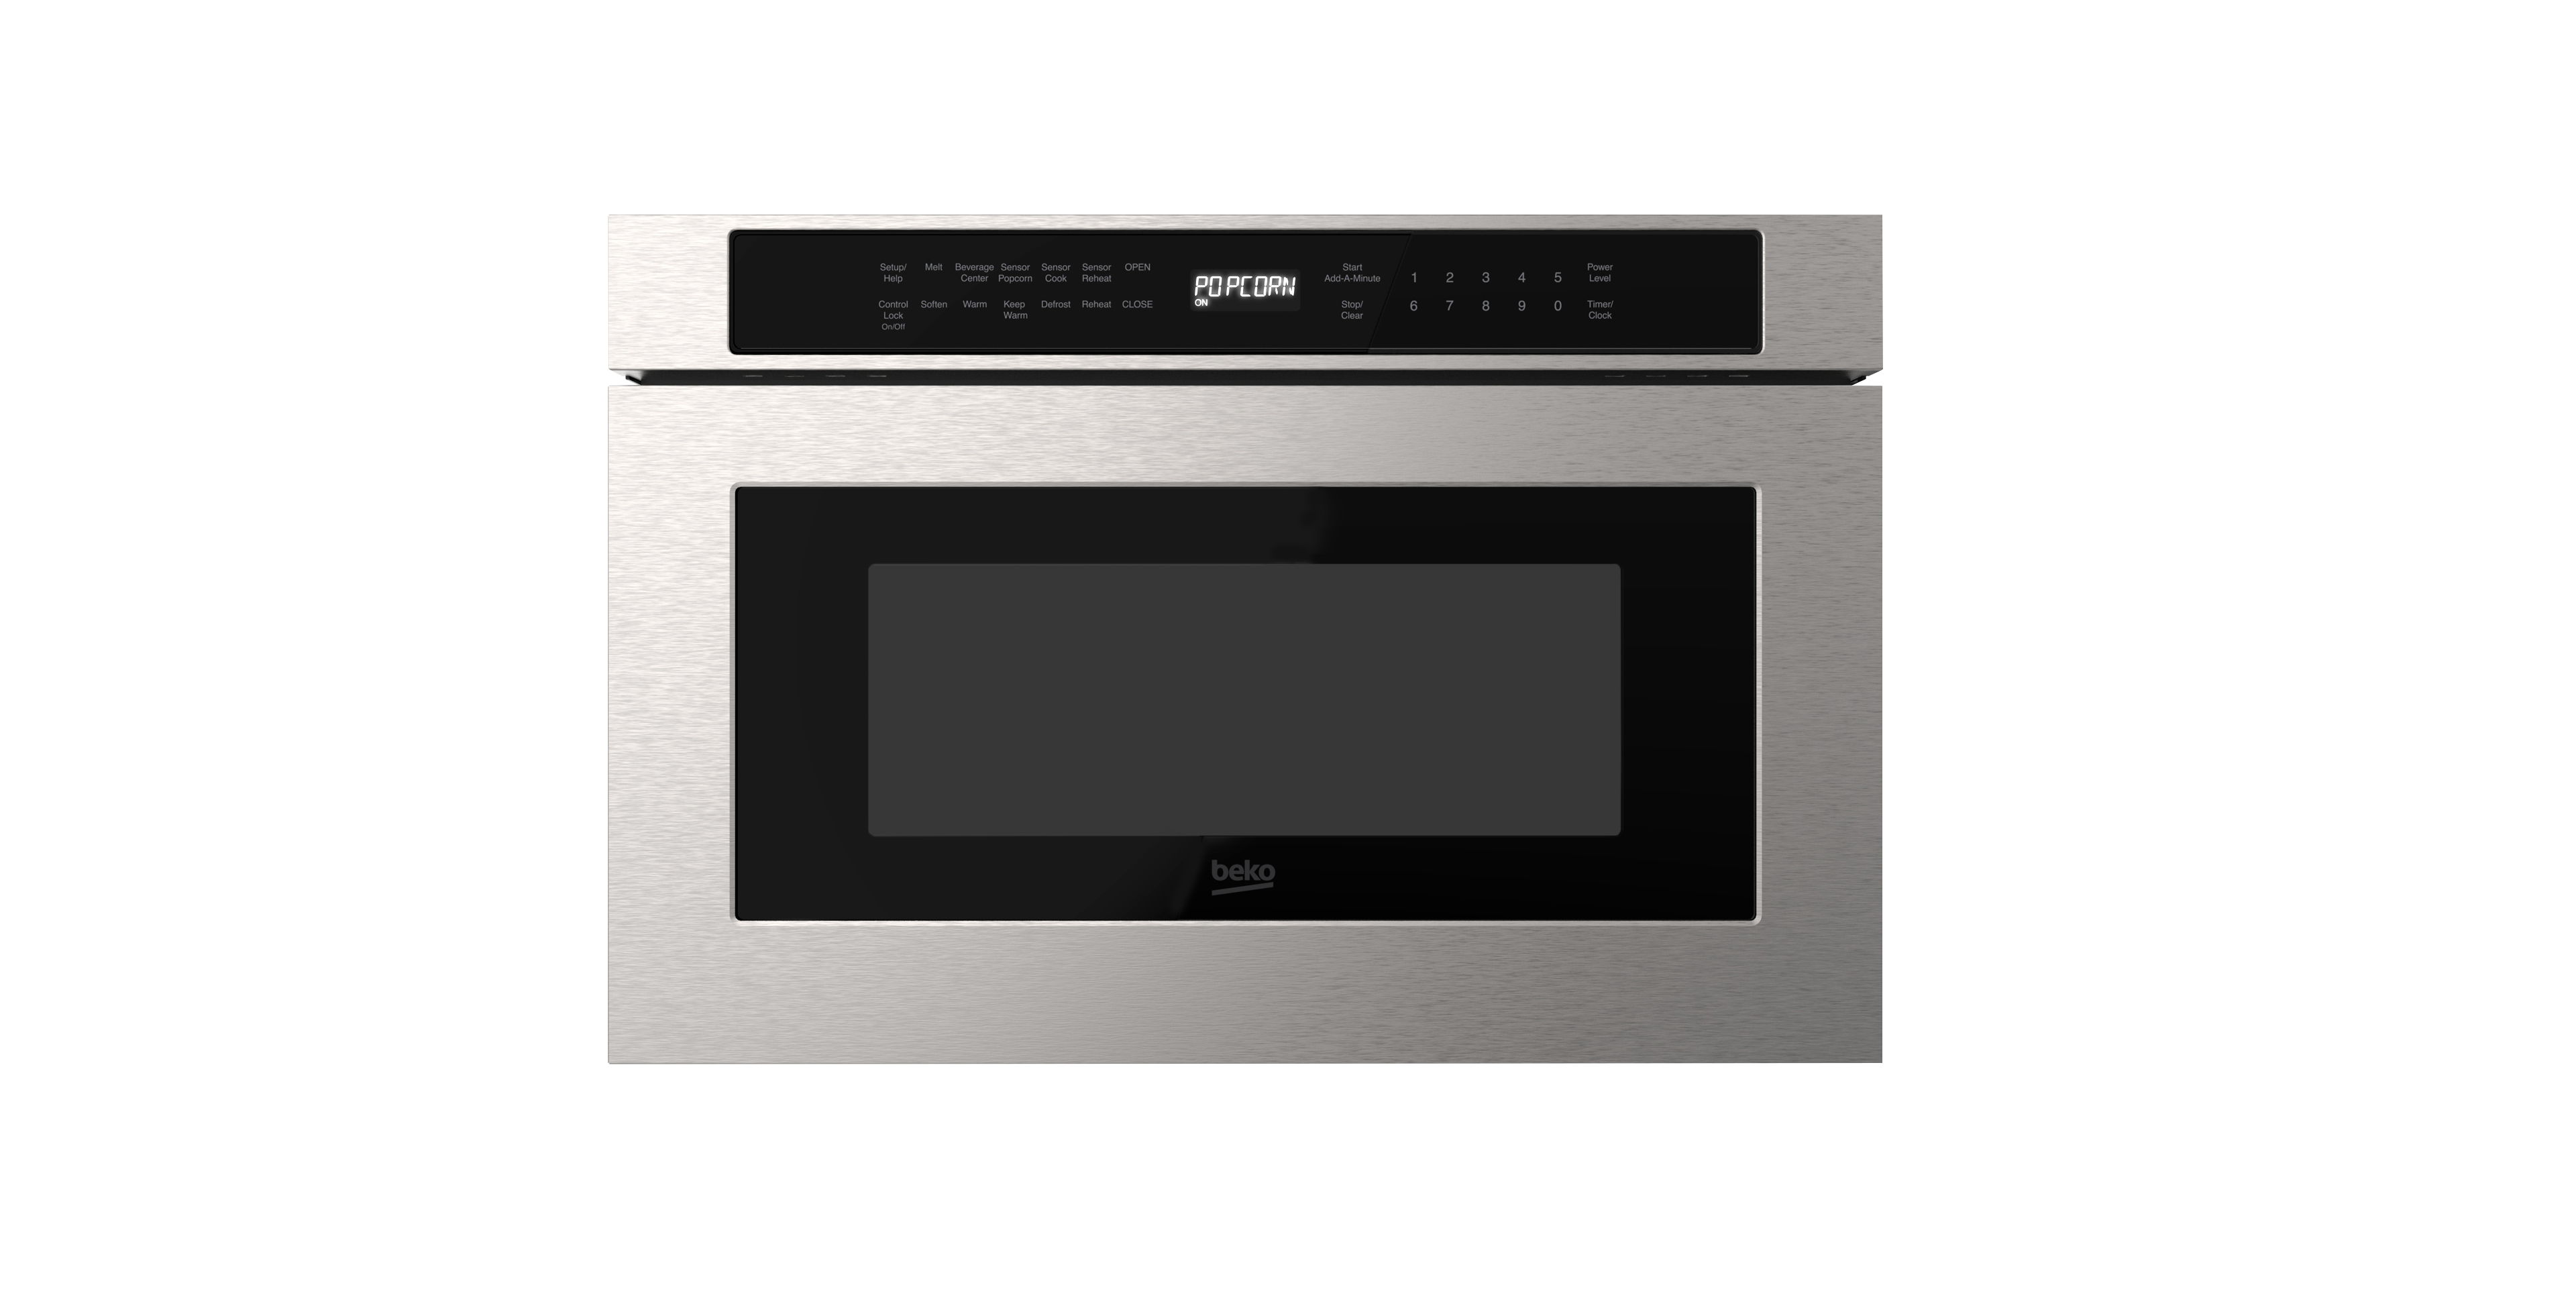 24” Built-in Microwave Drawer (950 W, 1.2 cu. ft.) | MWDR24100SS | BEKO